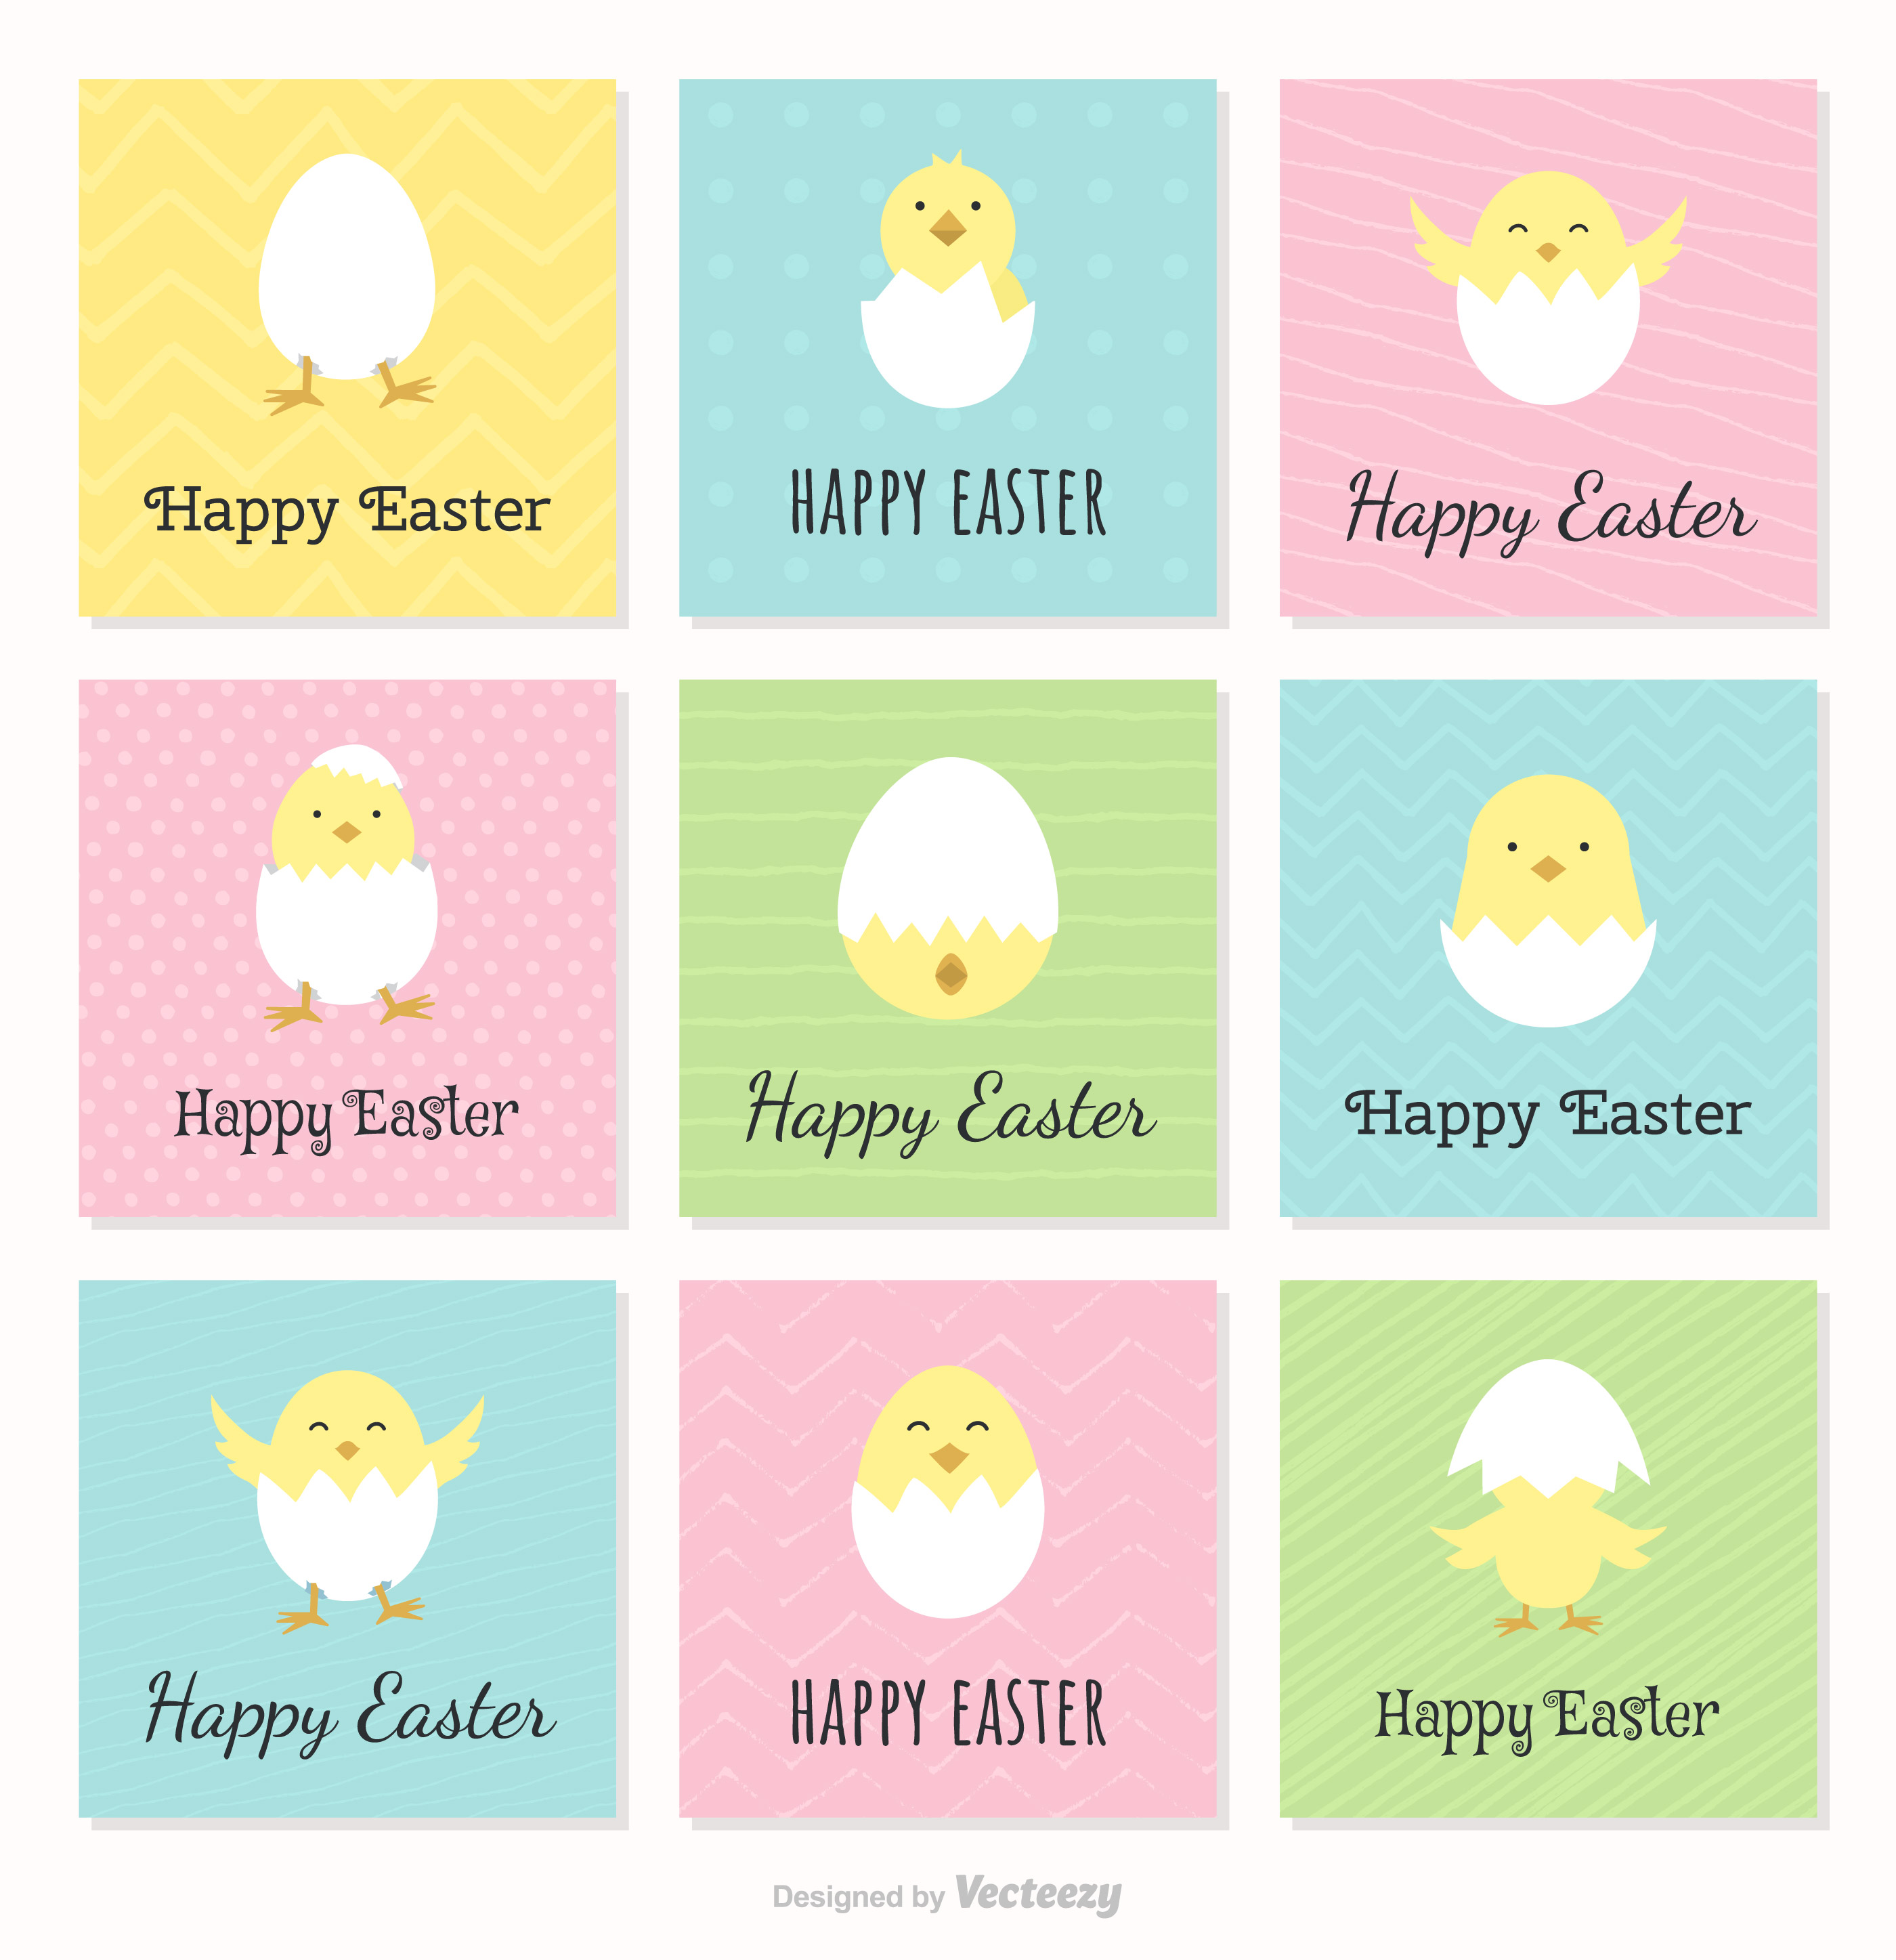 Download Happy Easter Cards With Cute Chickens And Broken Eggs for free.